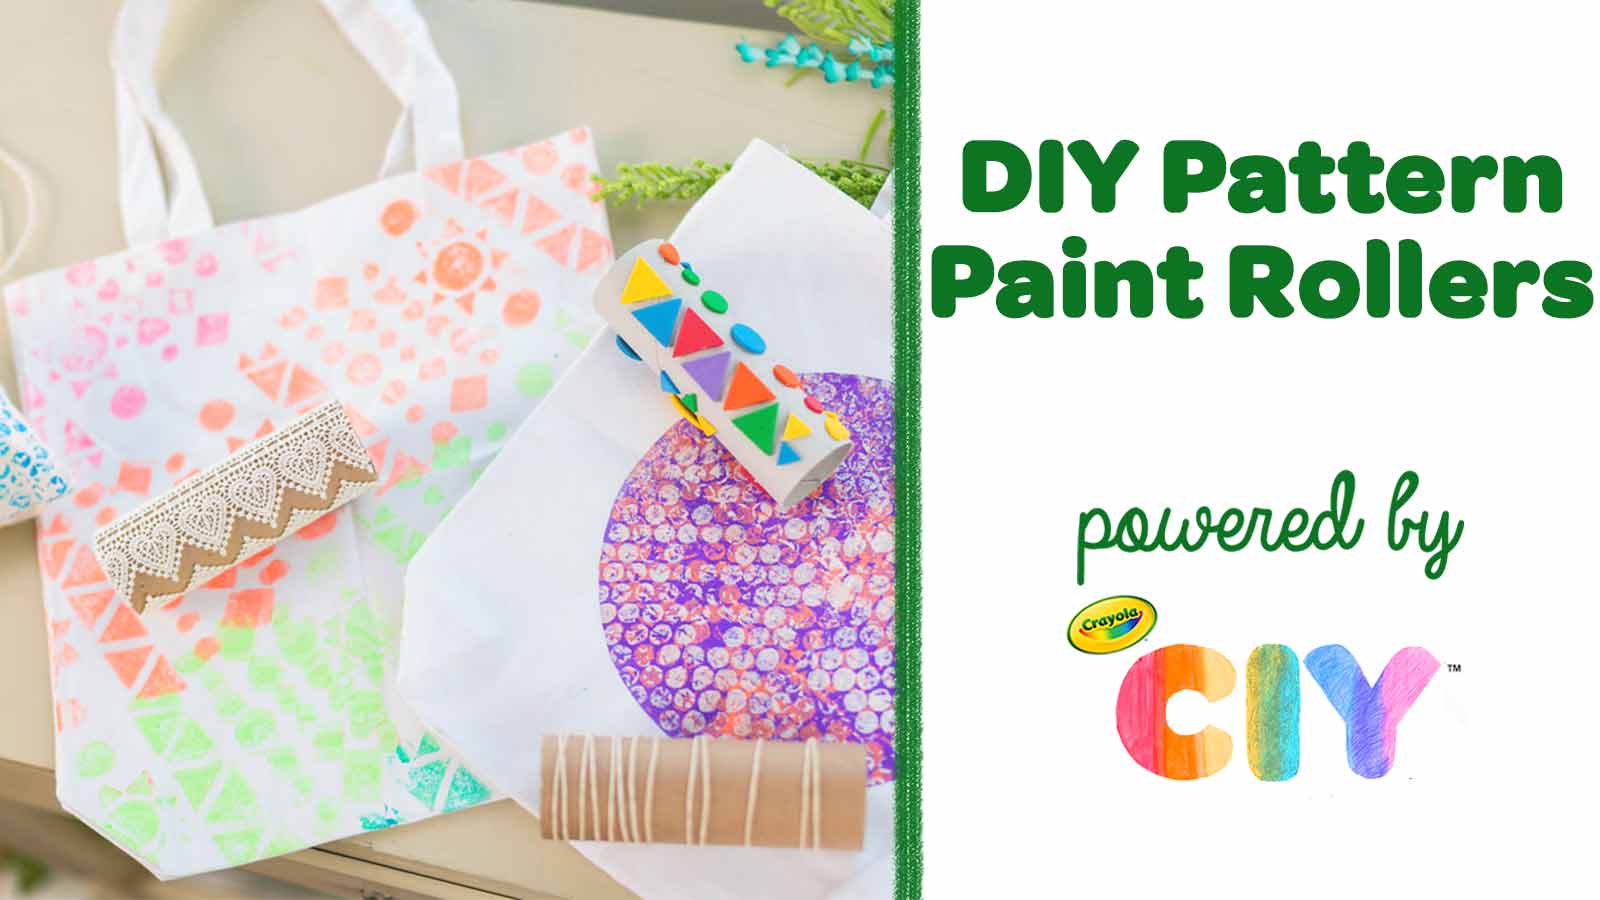 DIY Pattern Paint Rollers CIY Video Poster Frame